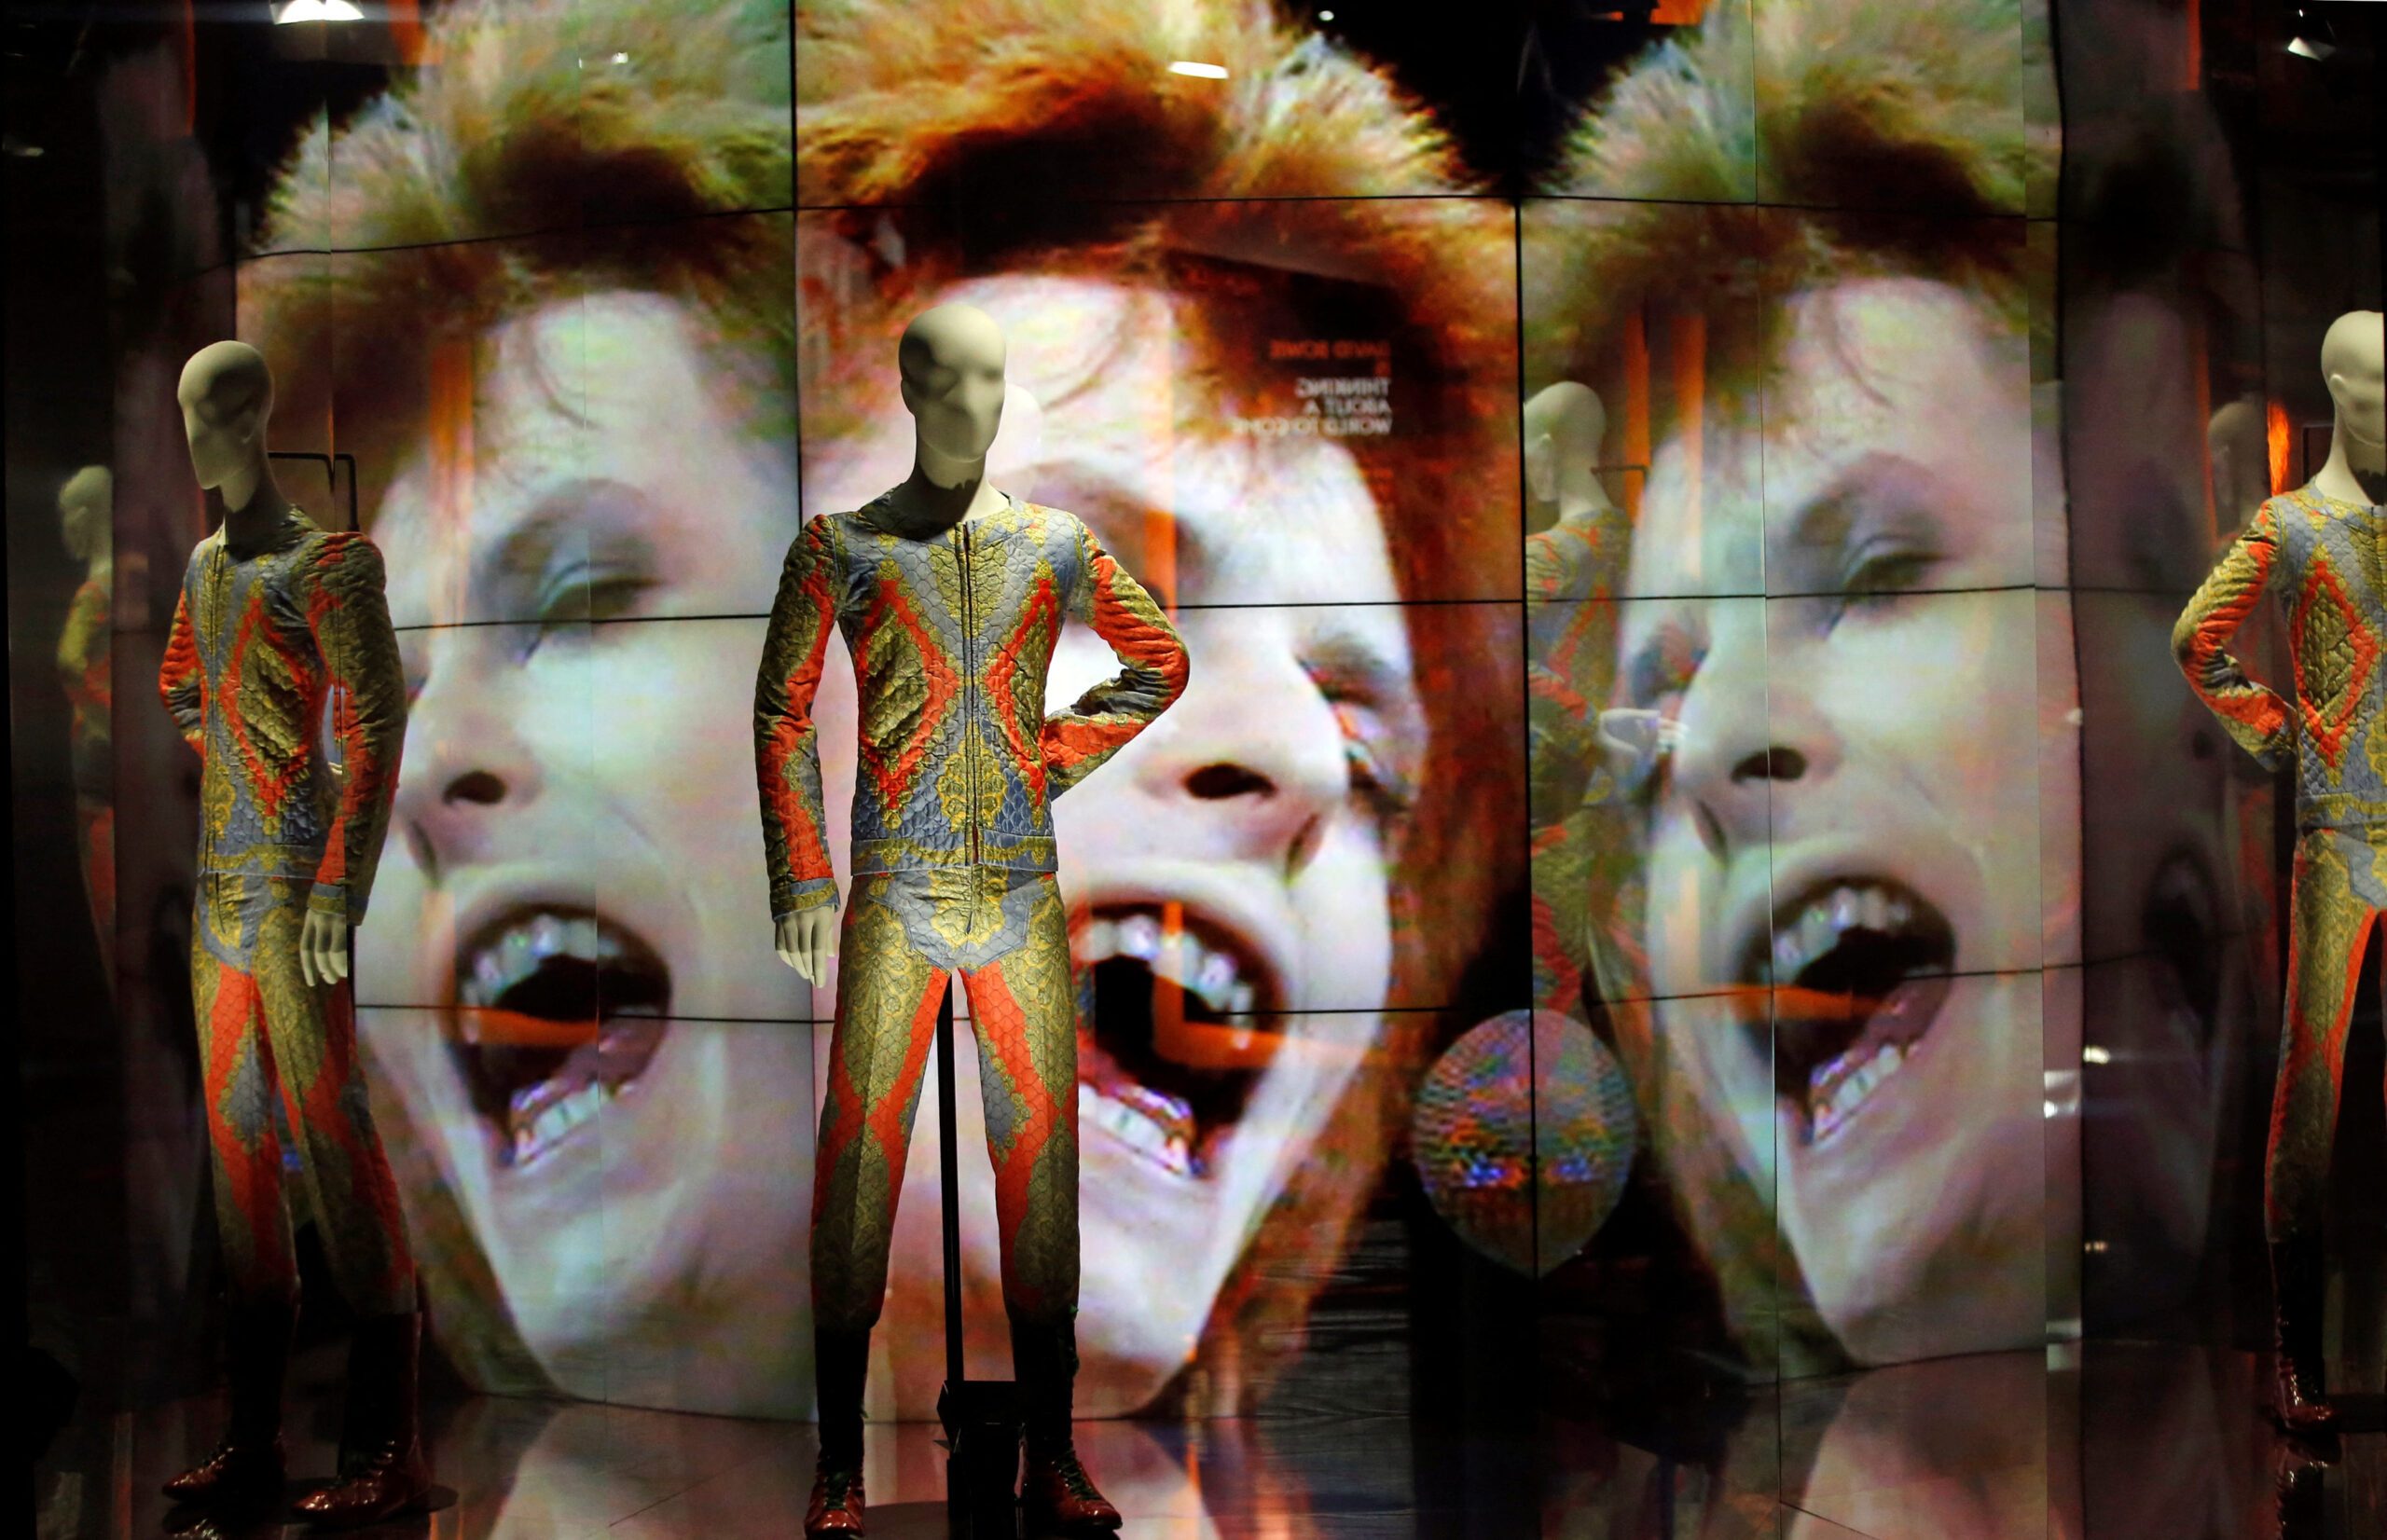 Britain’s V&A museum secures David Bowie archive, will make public in 2025